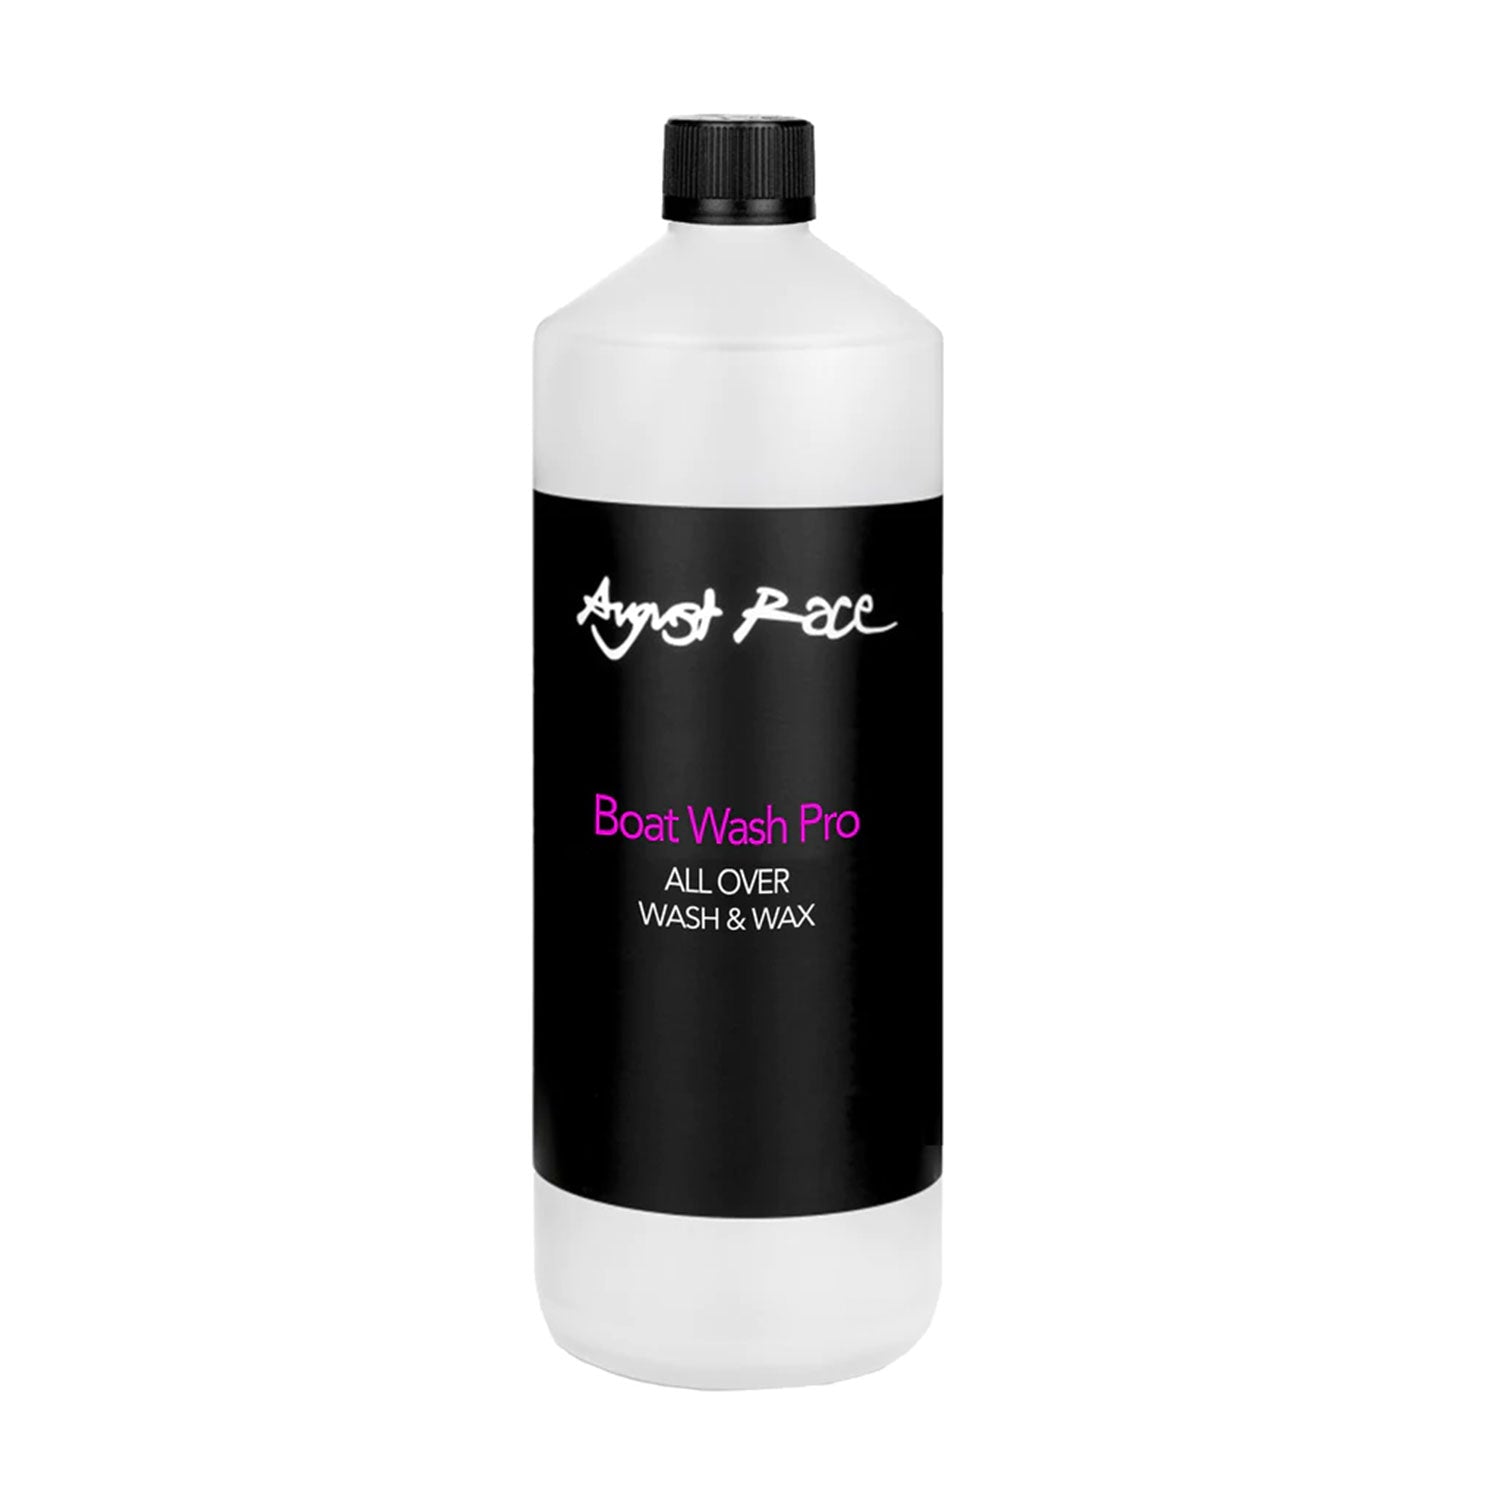 August Race - Boat Wash Pro - Complete Wash & Wax